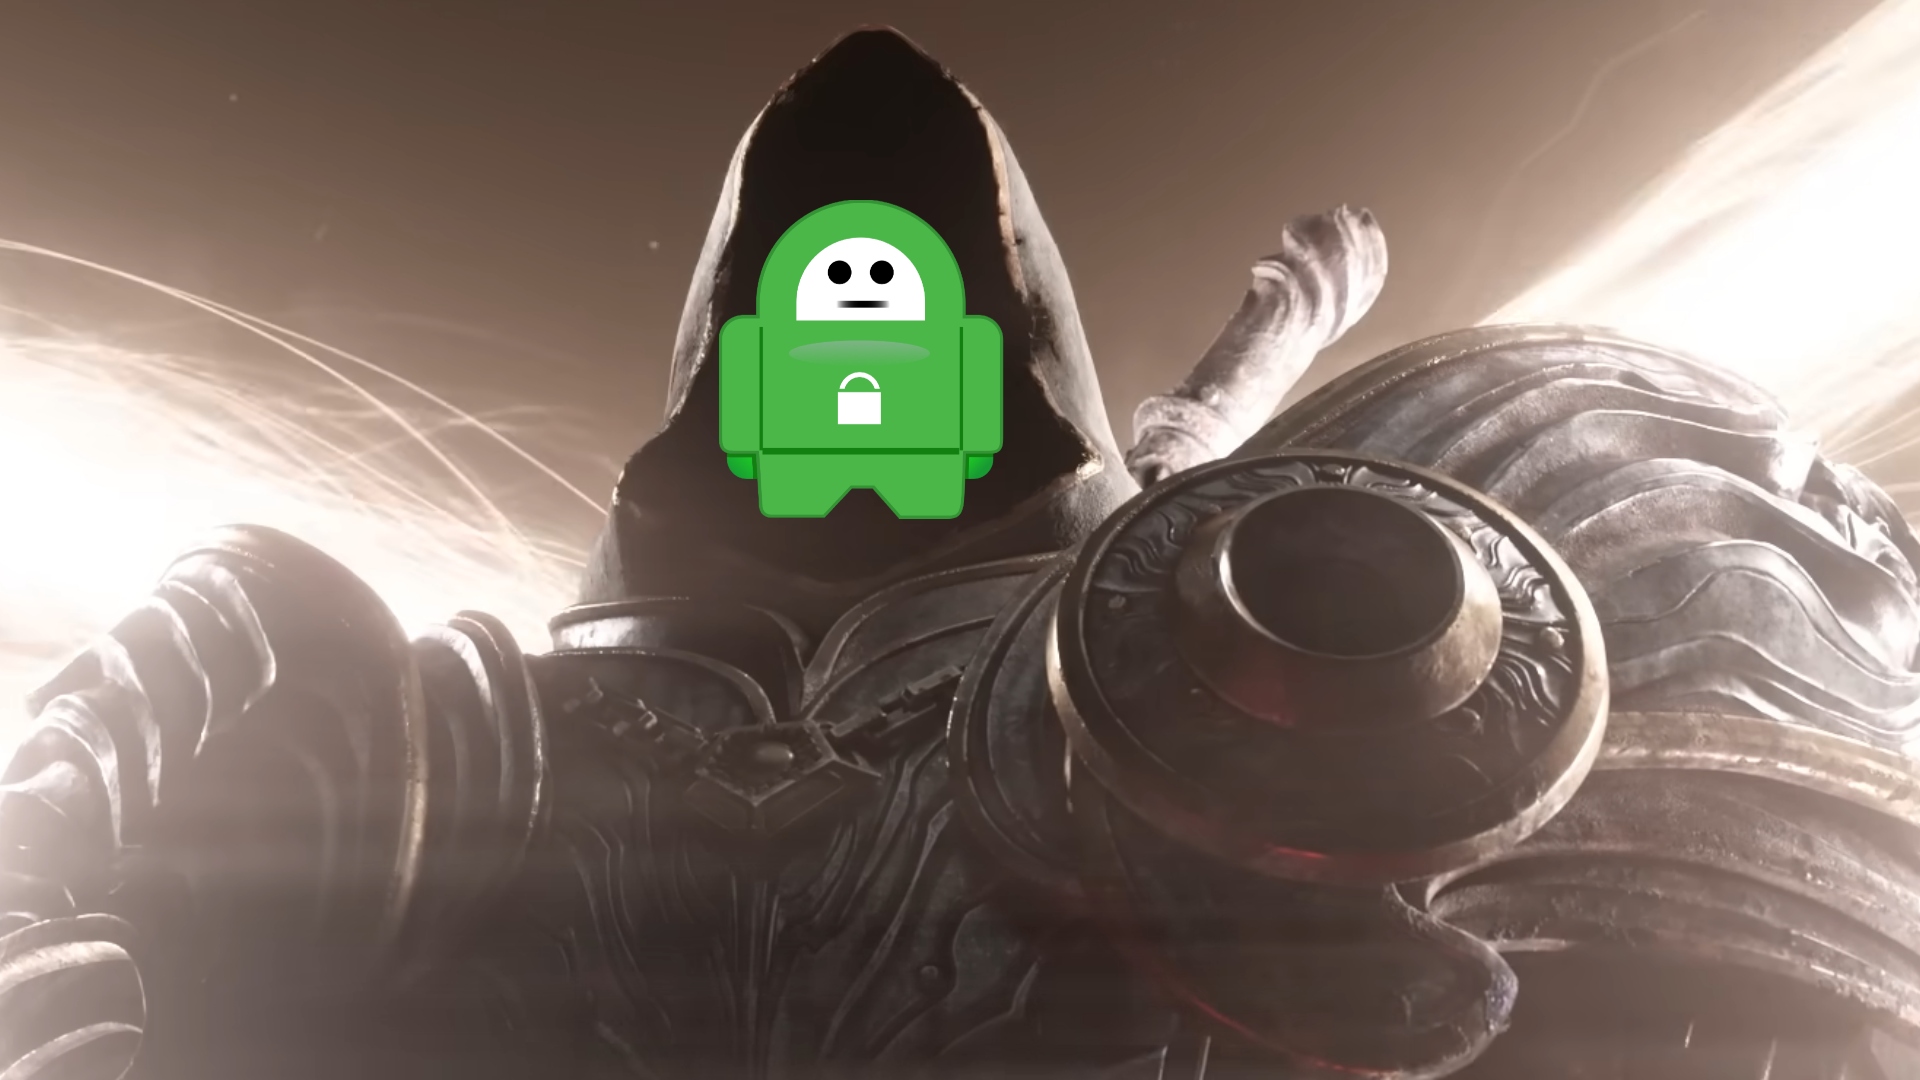 Best Diablo 4 VPN: Private Internet Access. Image shows the PIA logo in a menacing, hooded outfit.